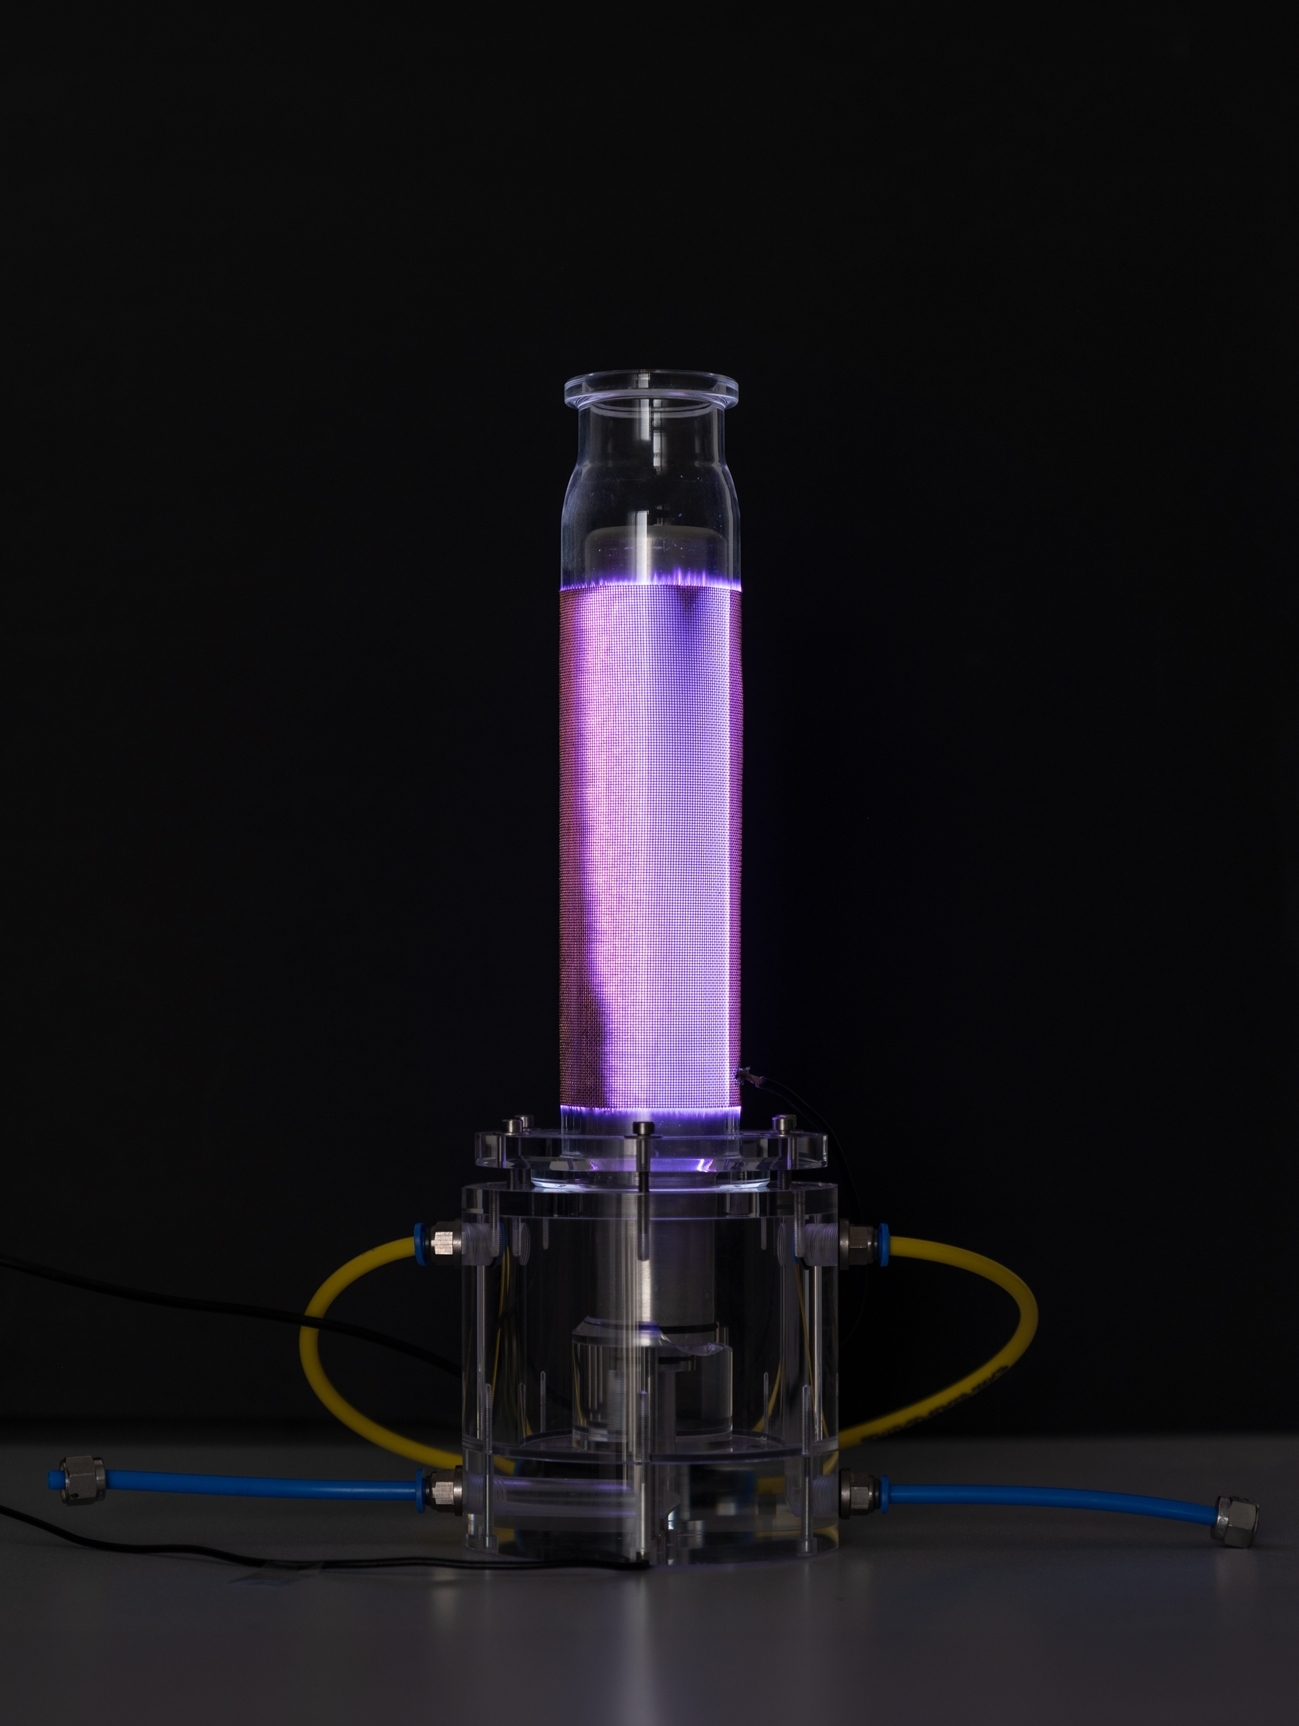 Atmospheric water plasma on a laboratory scale.